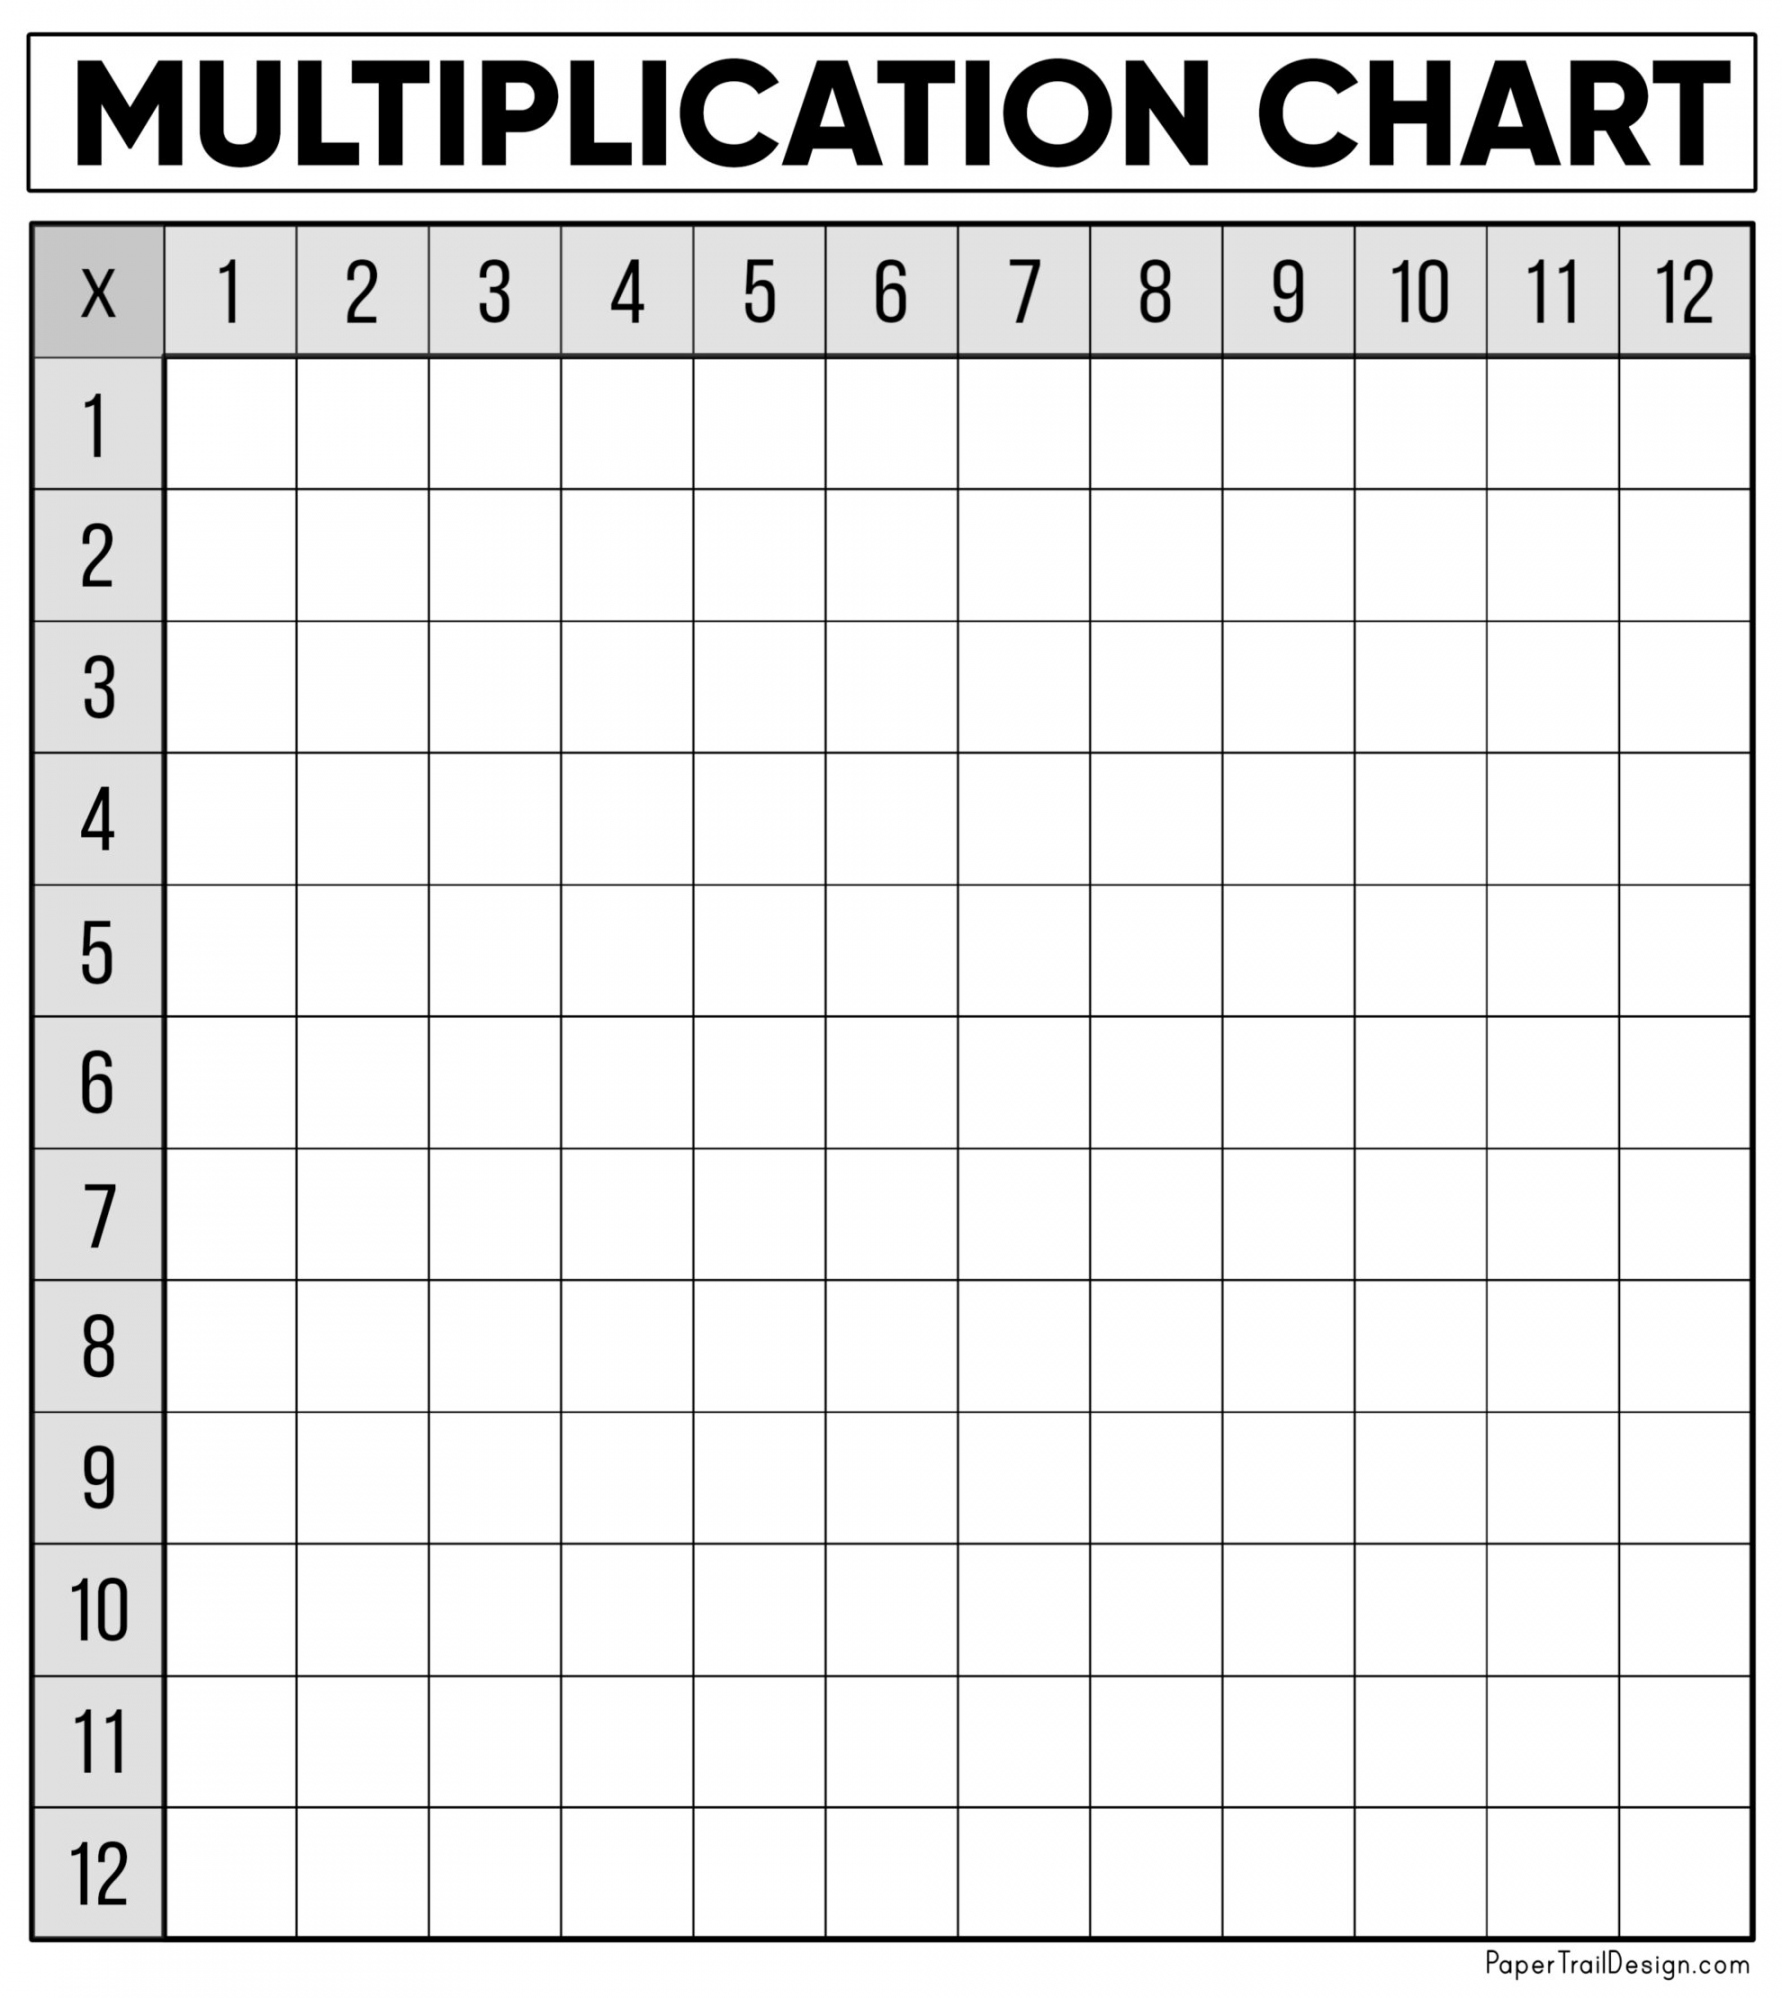 Free Multiplication Chart Printable - Paper Trail Design - FREE Printables - Multiplication Chart Blank